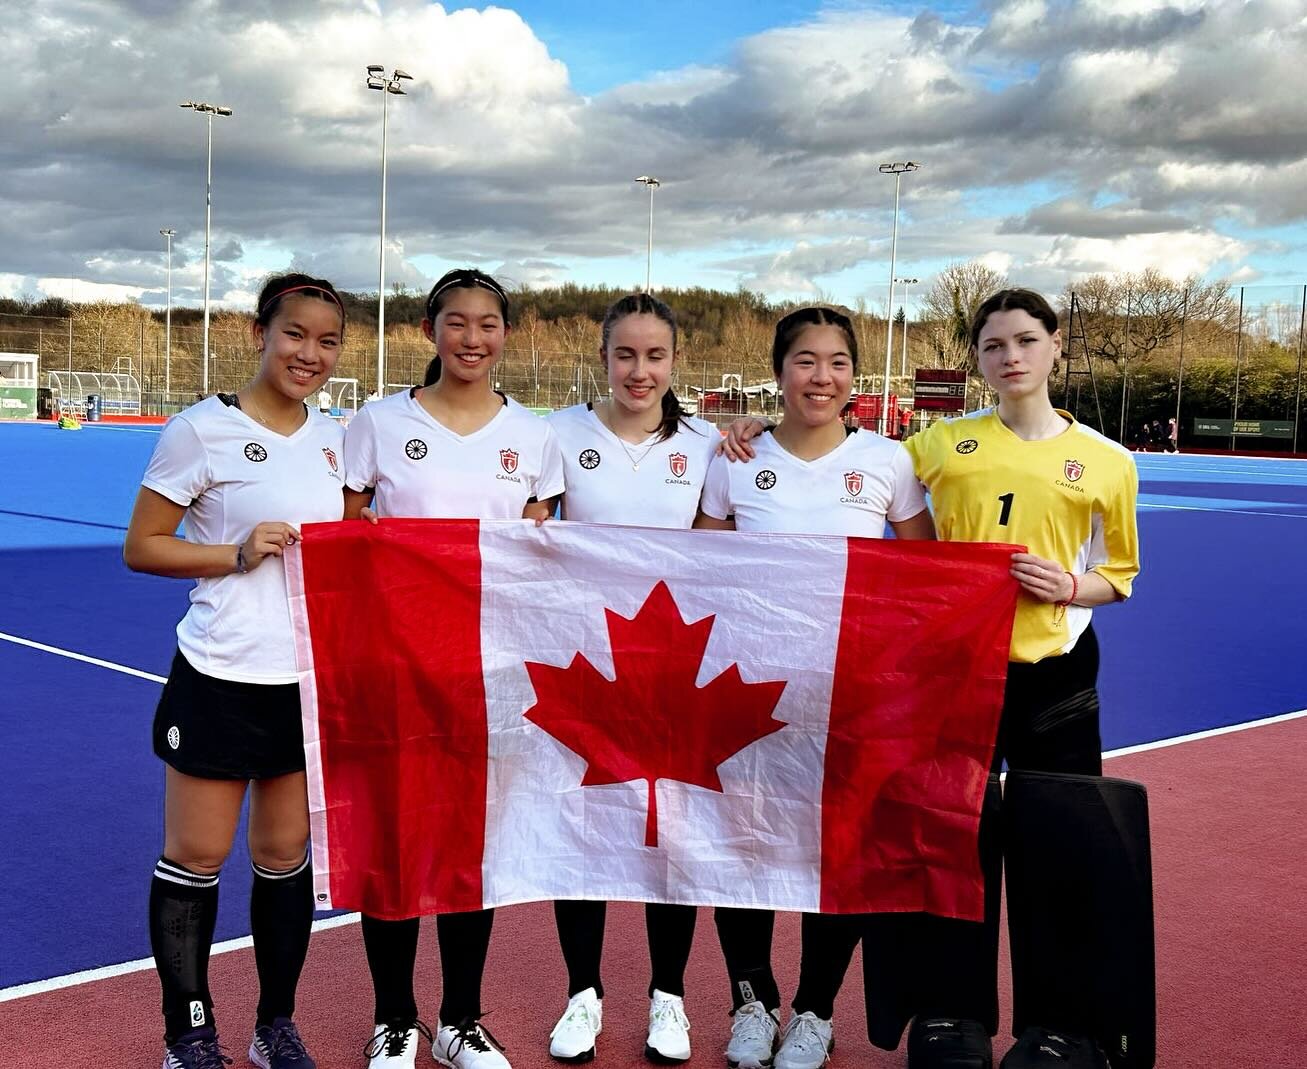 Our Sea to Sky FHC U18 athletes just wrapped up an incredible tour of Wales and Scotland, and we couldn&rsquo;t be prouder! 🇨🇦. Despite a close 2-1 loss against Wales in their final game of the tour, our girls showcased outstanding talent and deter